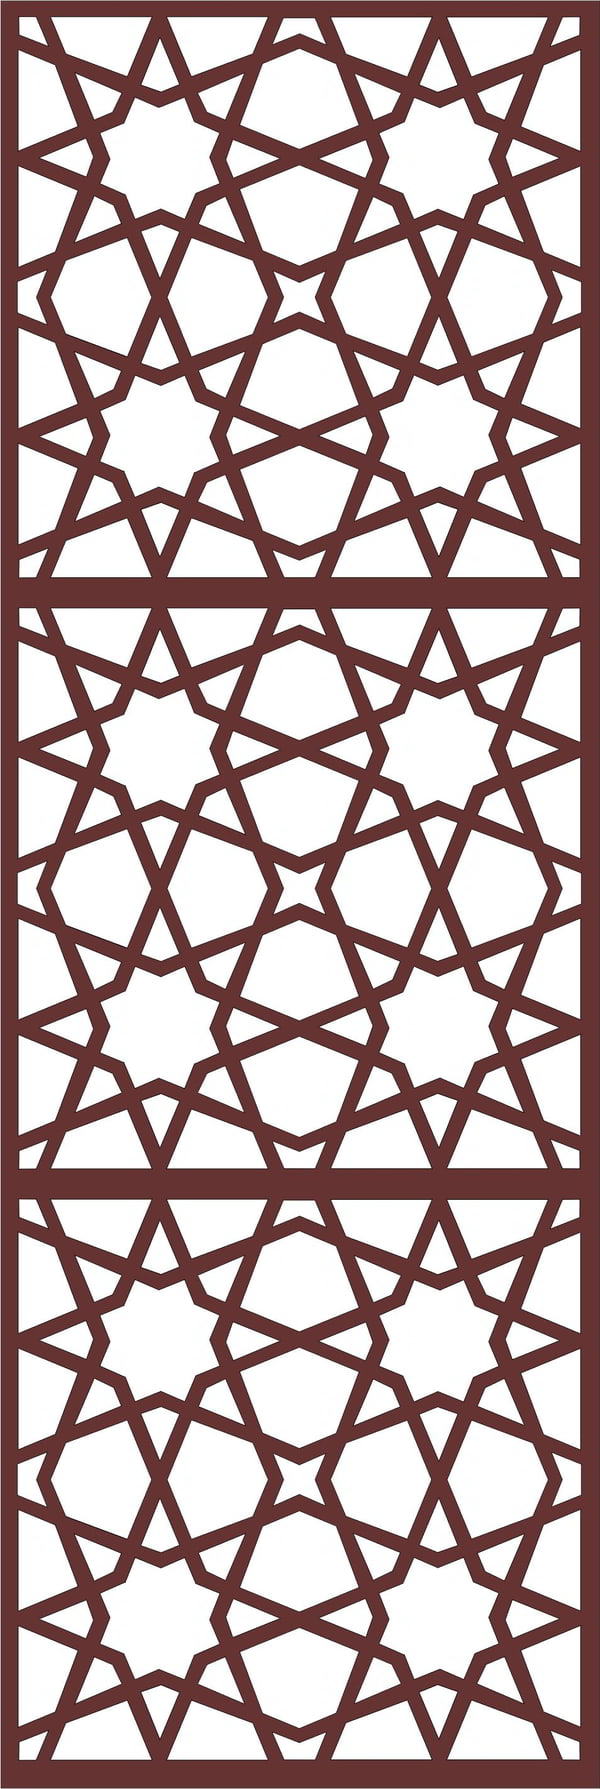 Laser Cut Decor Seamless Floral Grill Download Free Vector